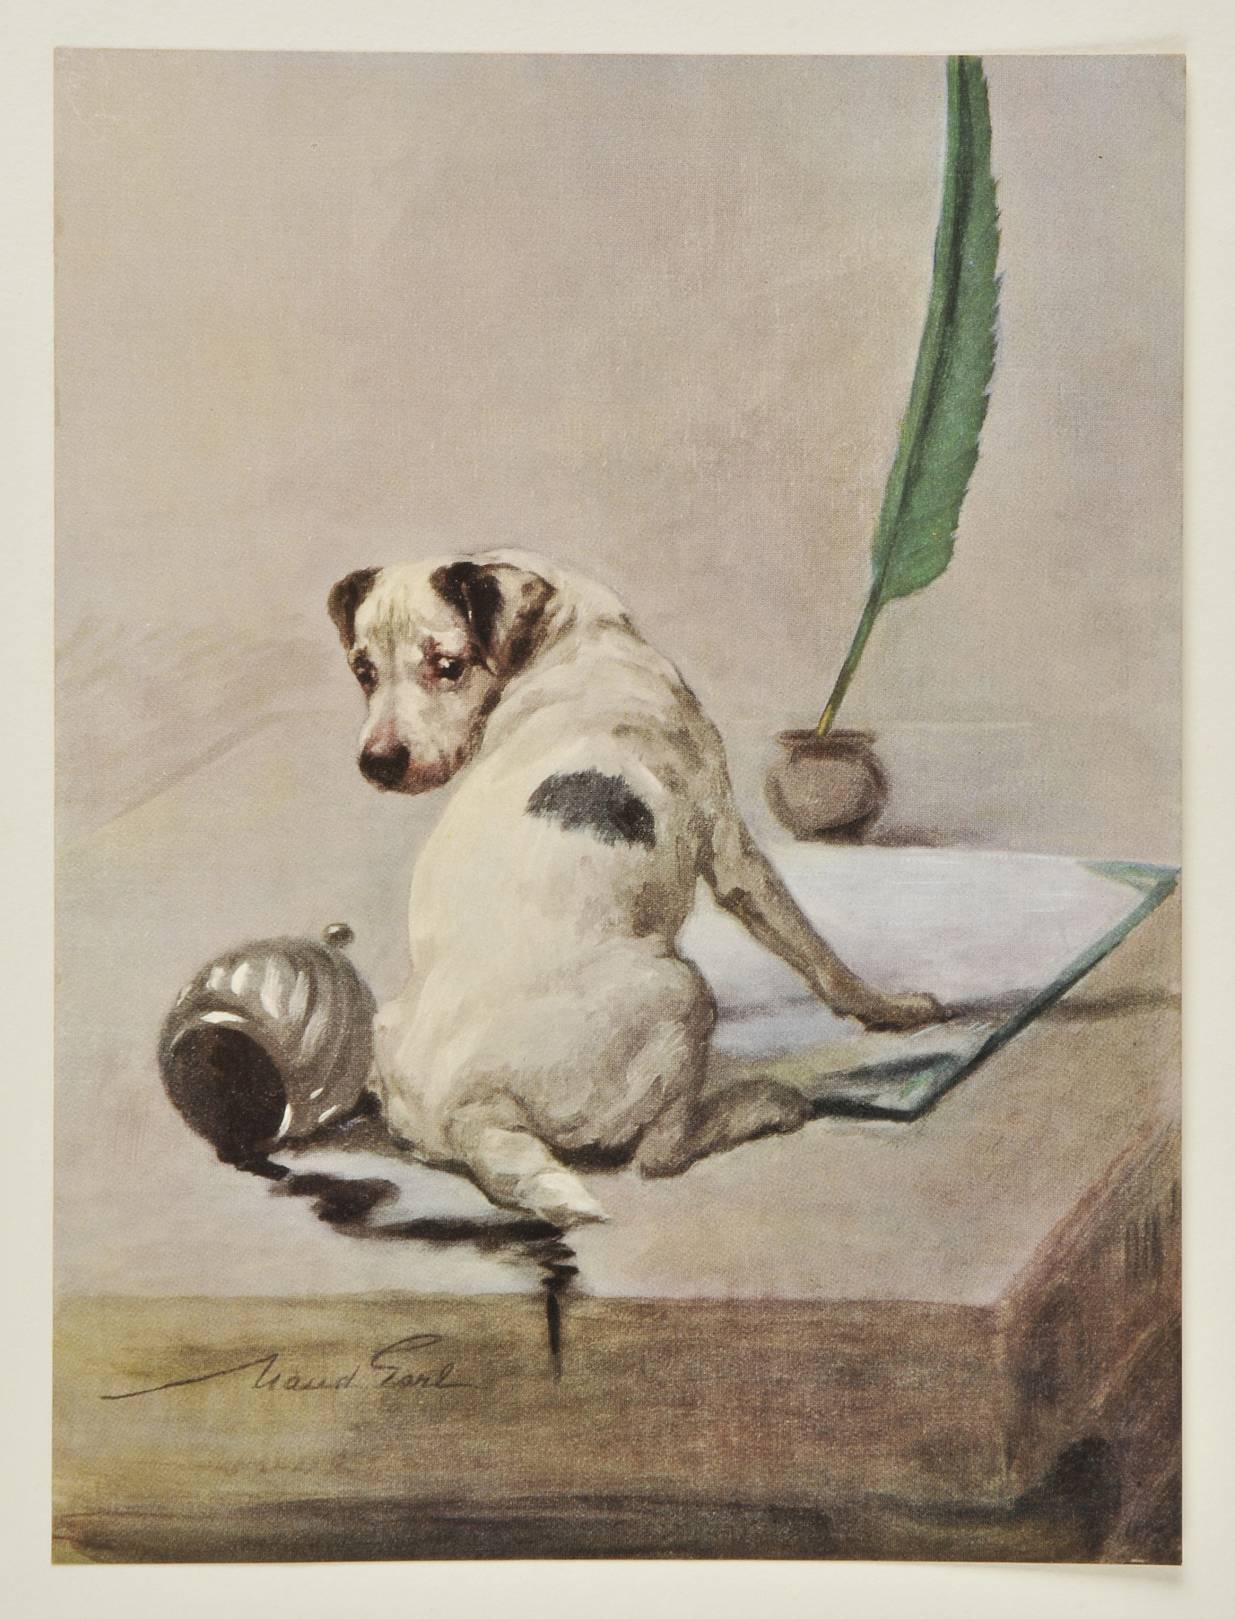 Earl (Maud), illustrator. The Power of the Dog, Described by A. Croxton Smith, circa 1911, 20